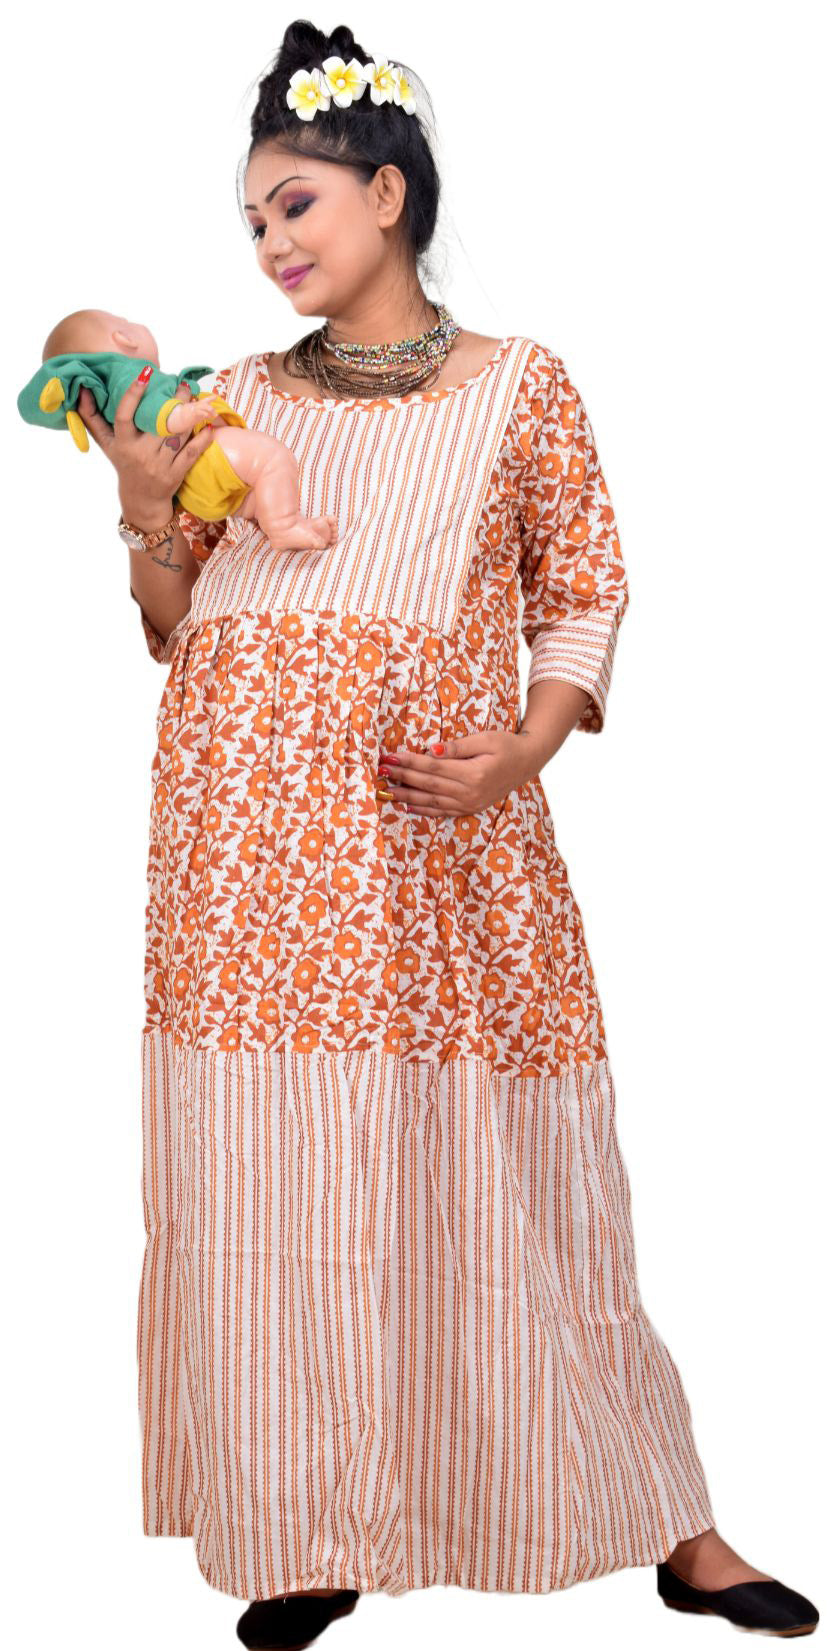 Buy RATAN Women's Cotton Maternity Feeding Gown with Zippers. Printed  Stylish Comfortable Kurti for Woman with Zip (Pink) at Amazon.in